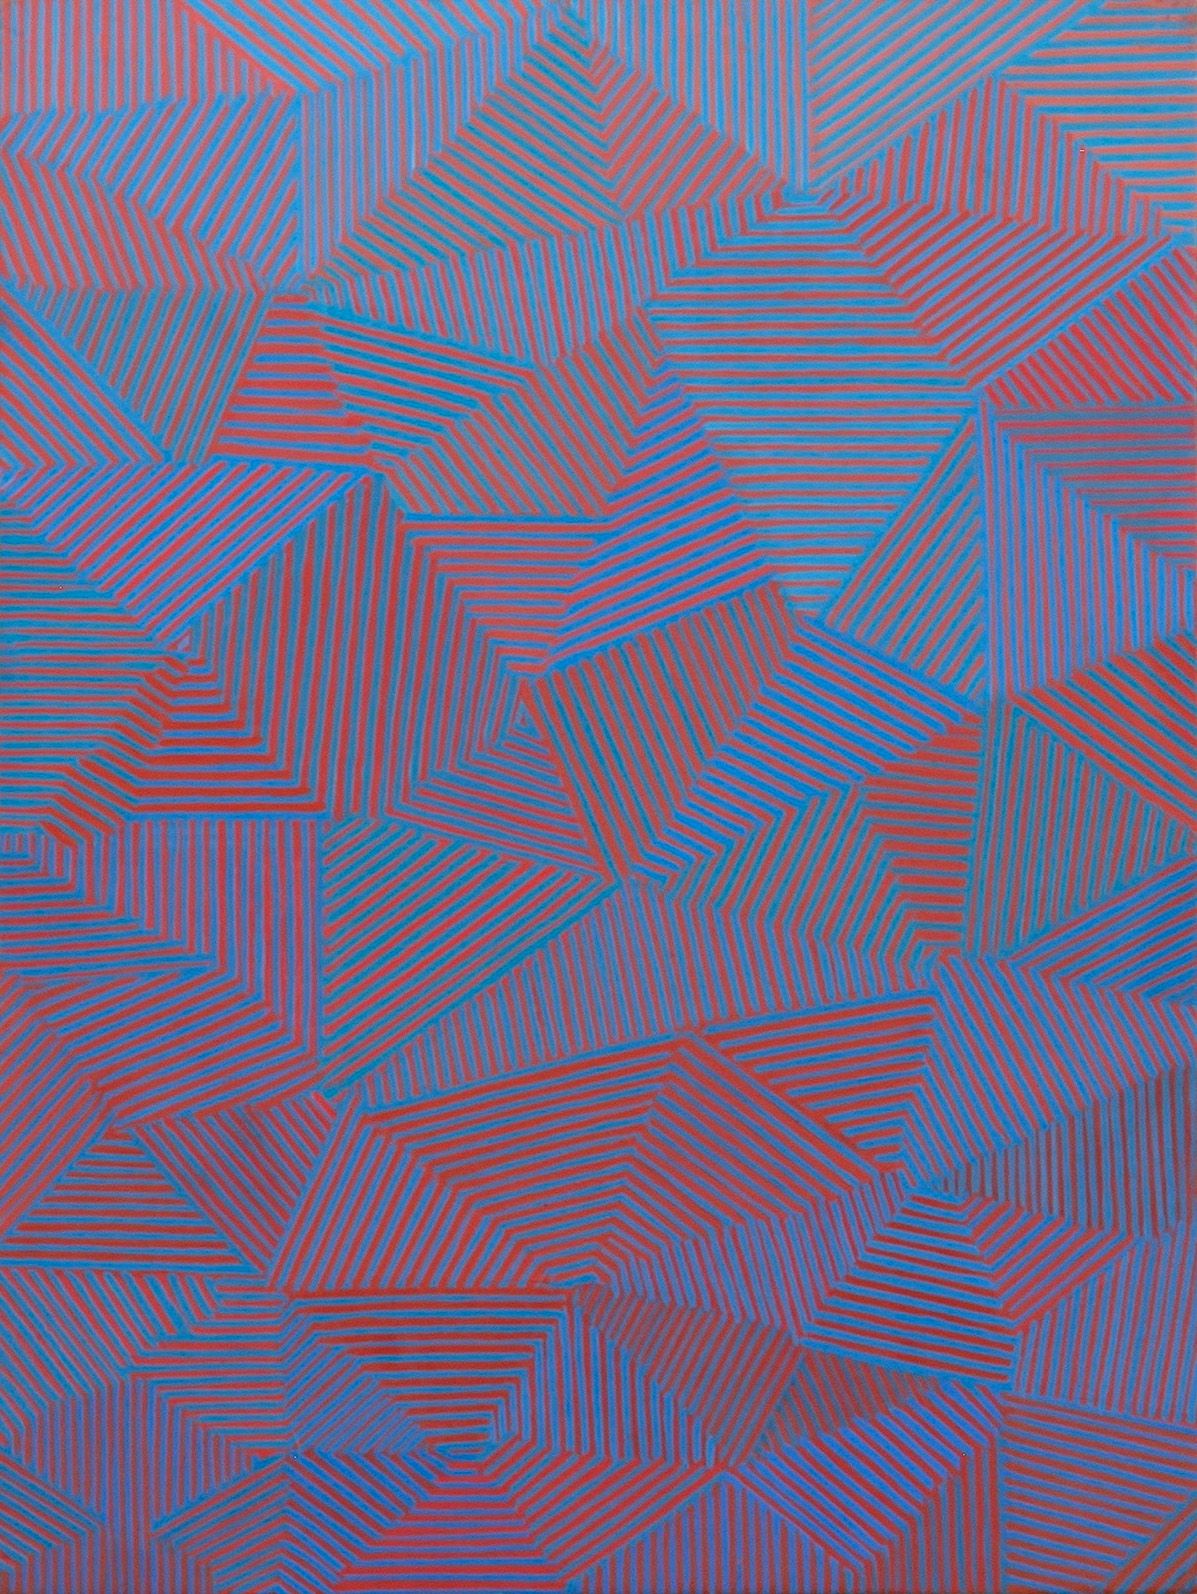 Gina Borg, “Red and Blue"